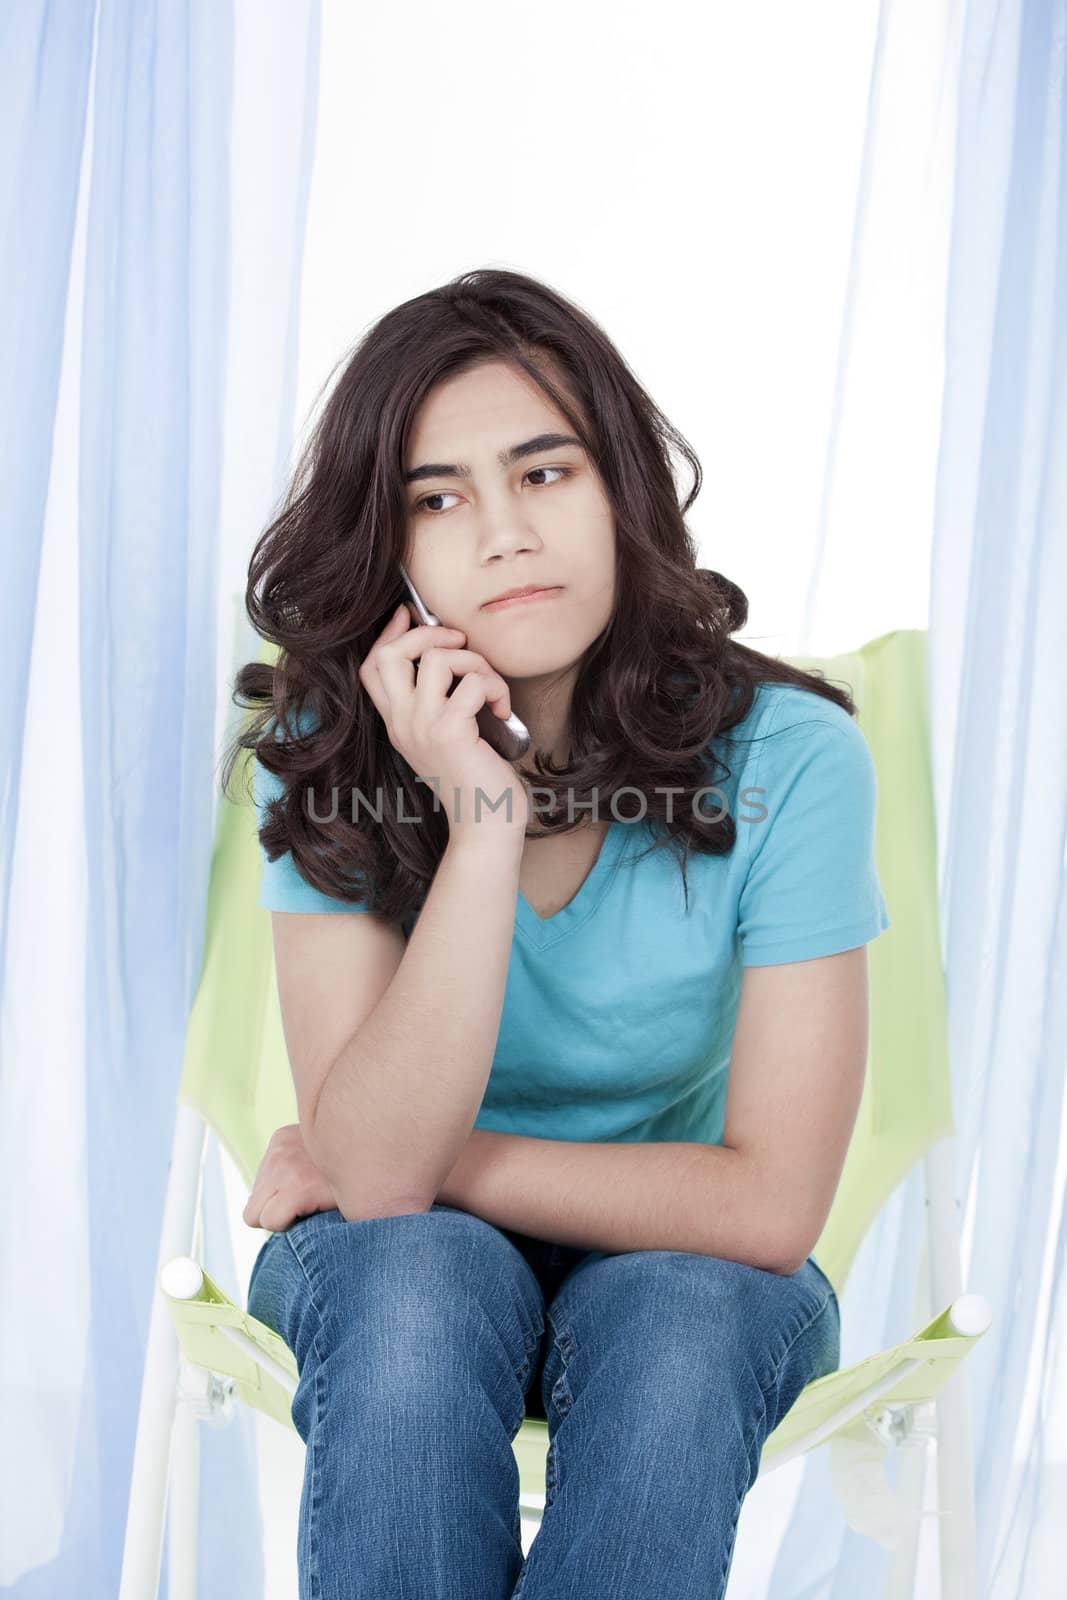 Teen girl or young woman having stressful phone conversation by jarenwicklund